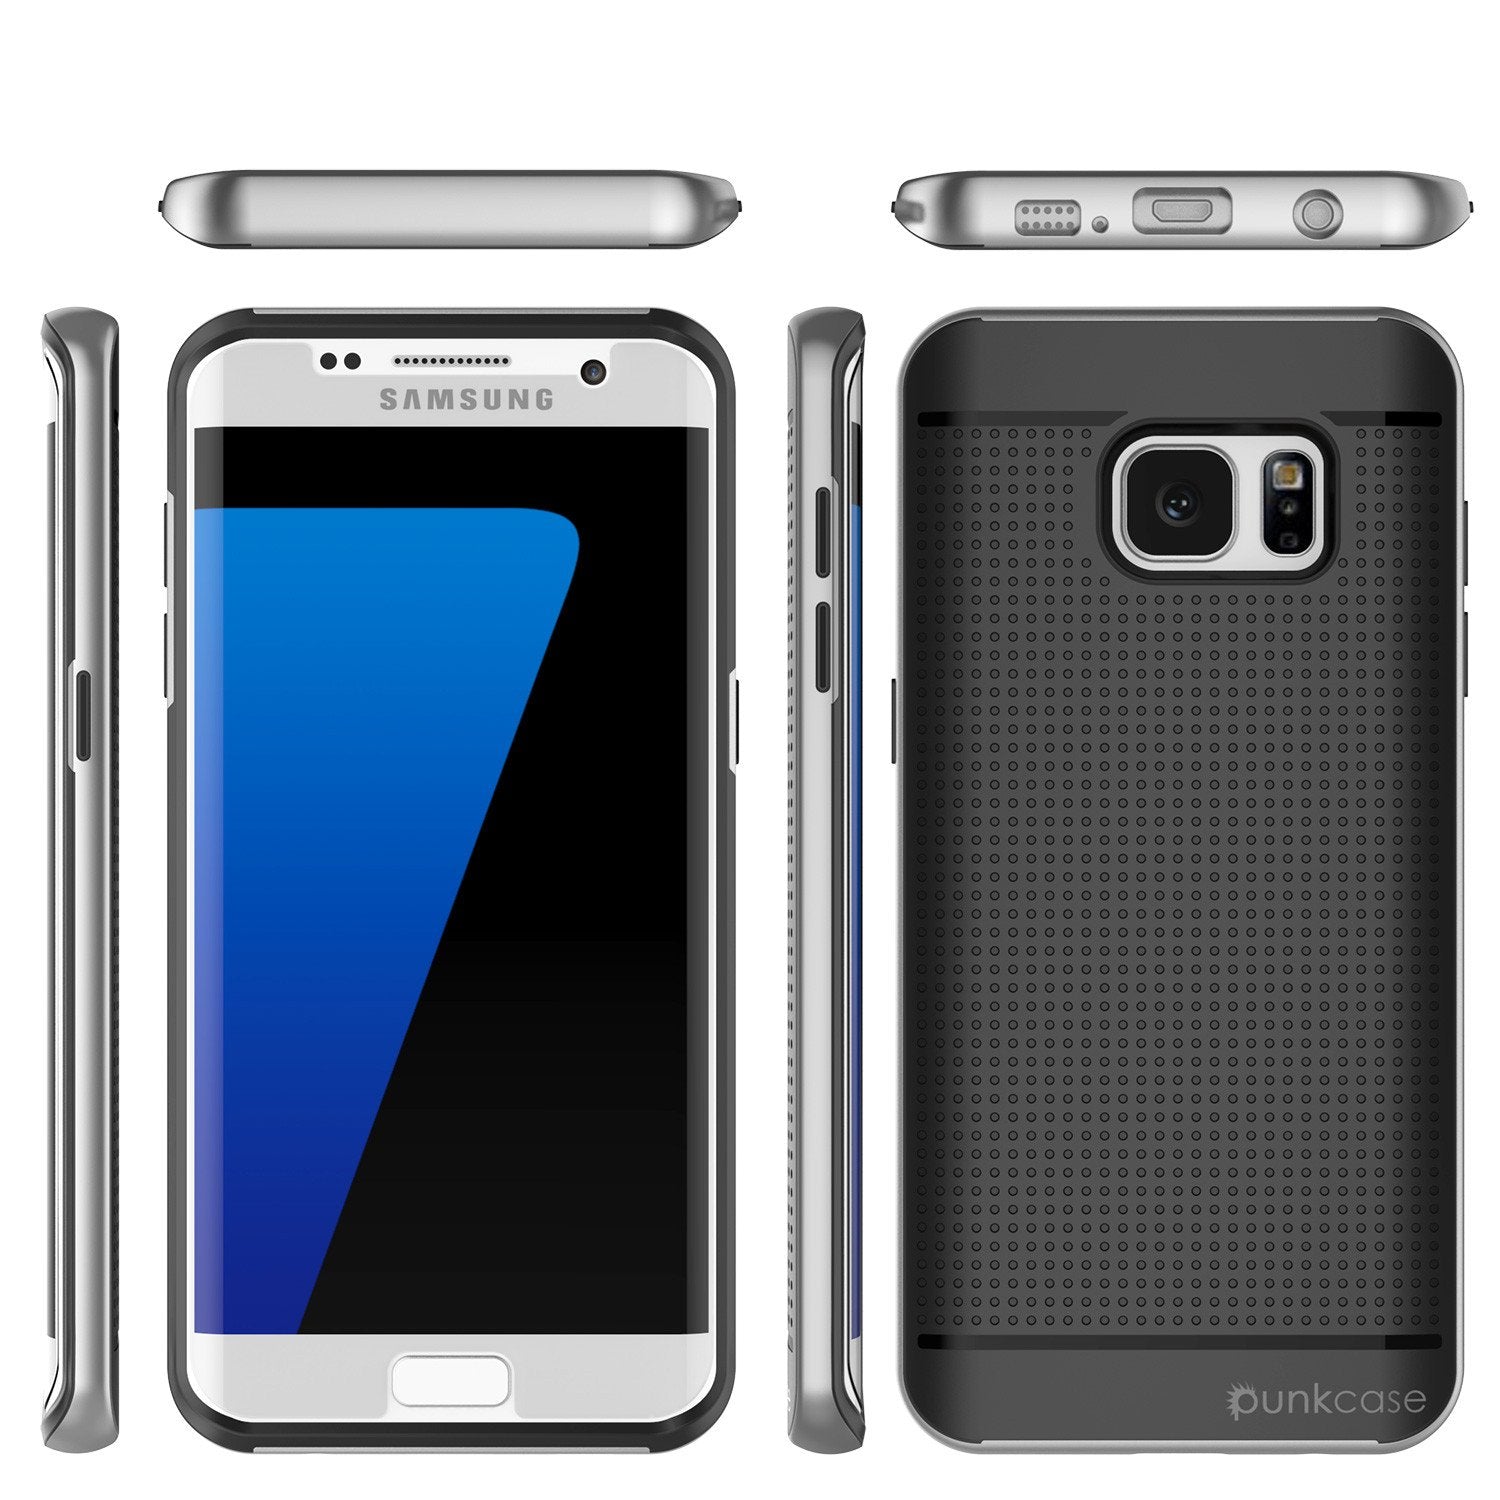 Galaxy S7 Edge Case, PunkCase STEALTH Grey Series Hybrid 3-Piece Shockproof Dual Layer Cover